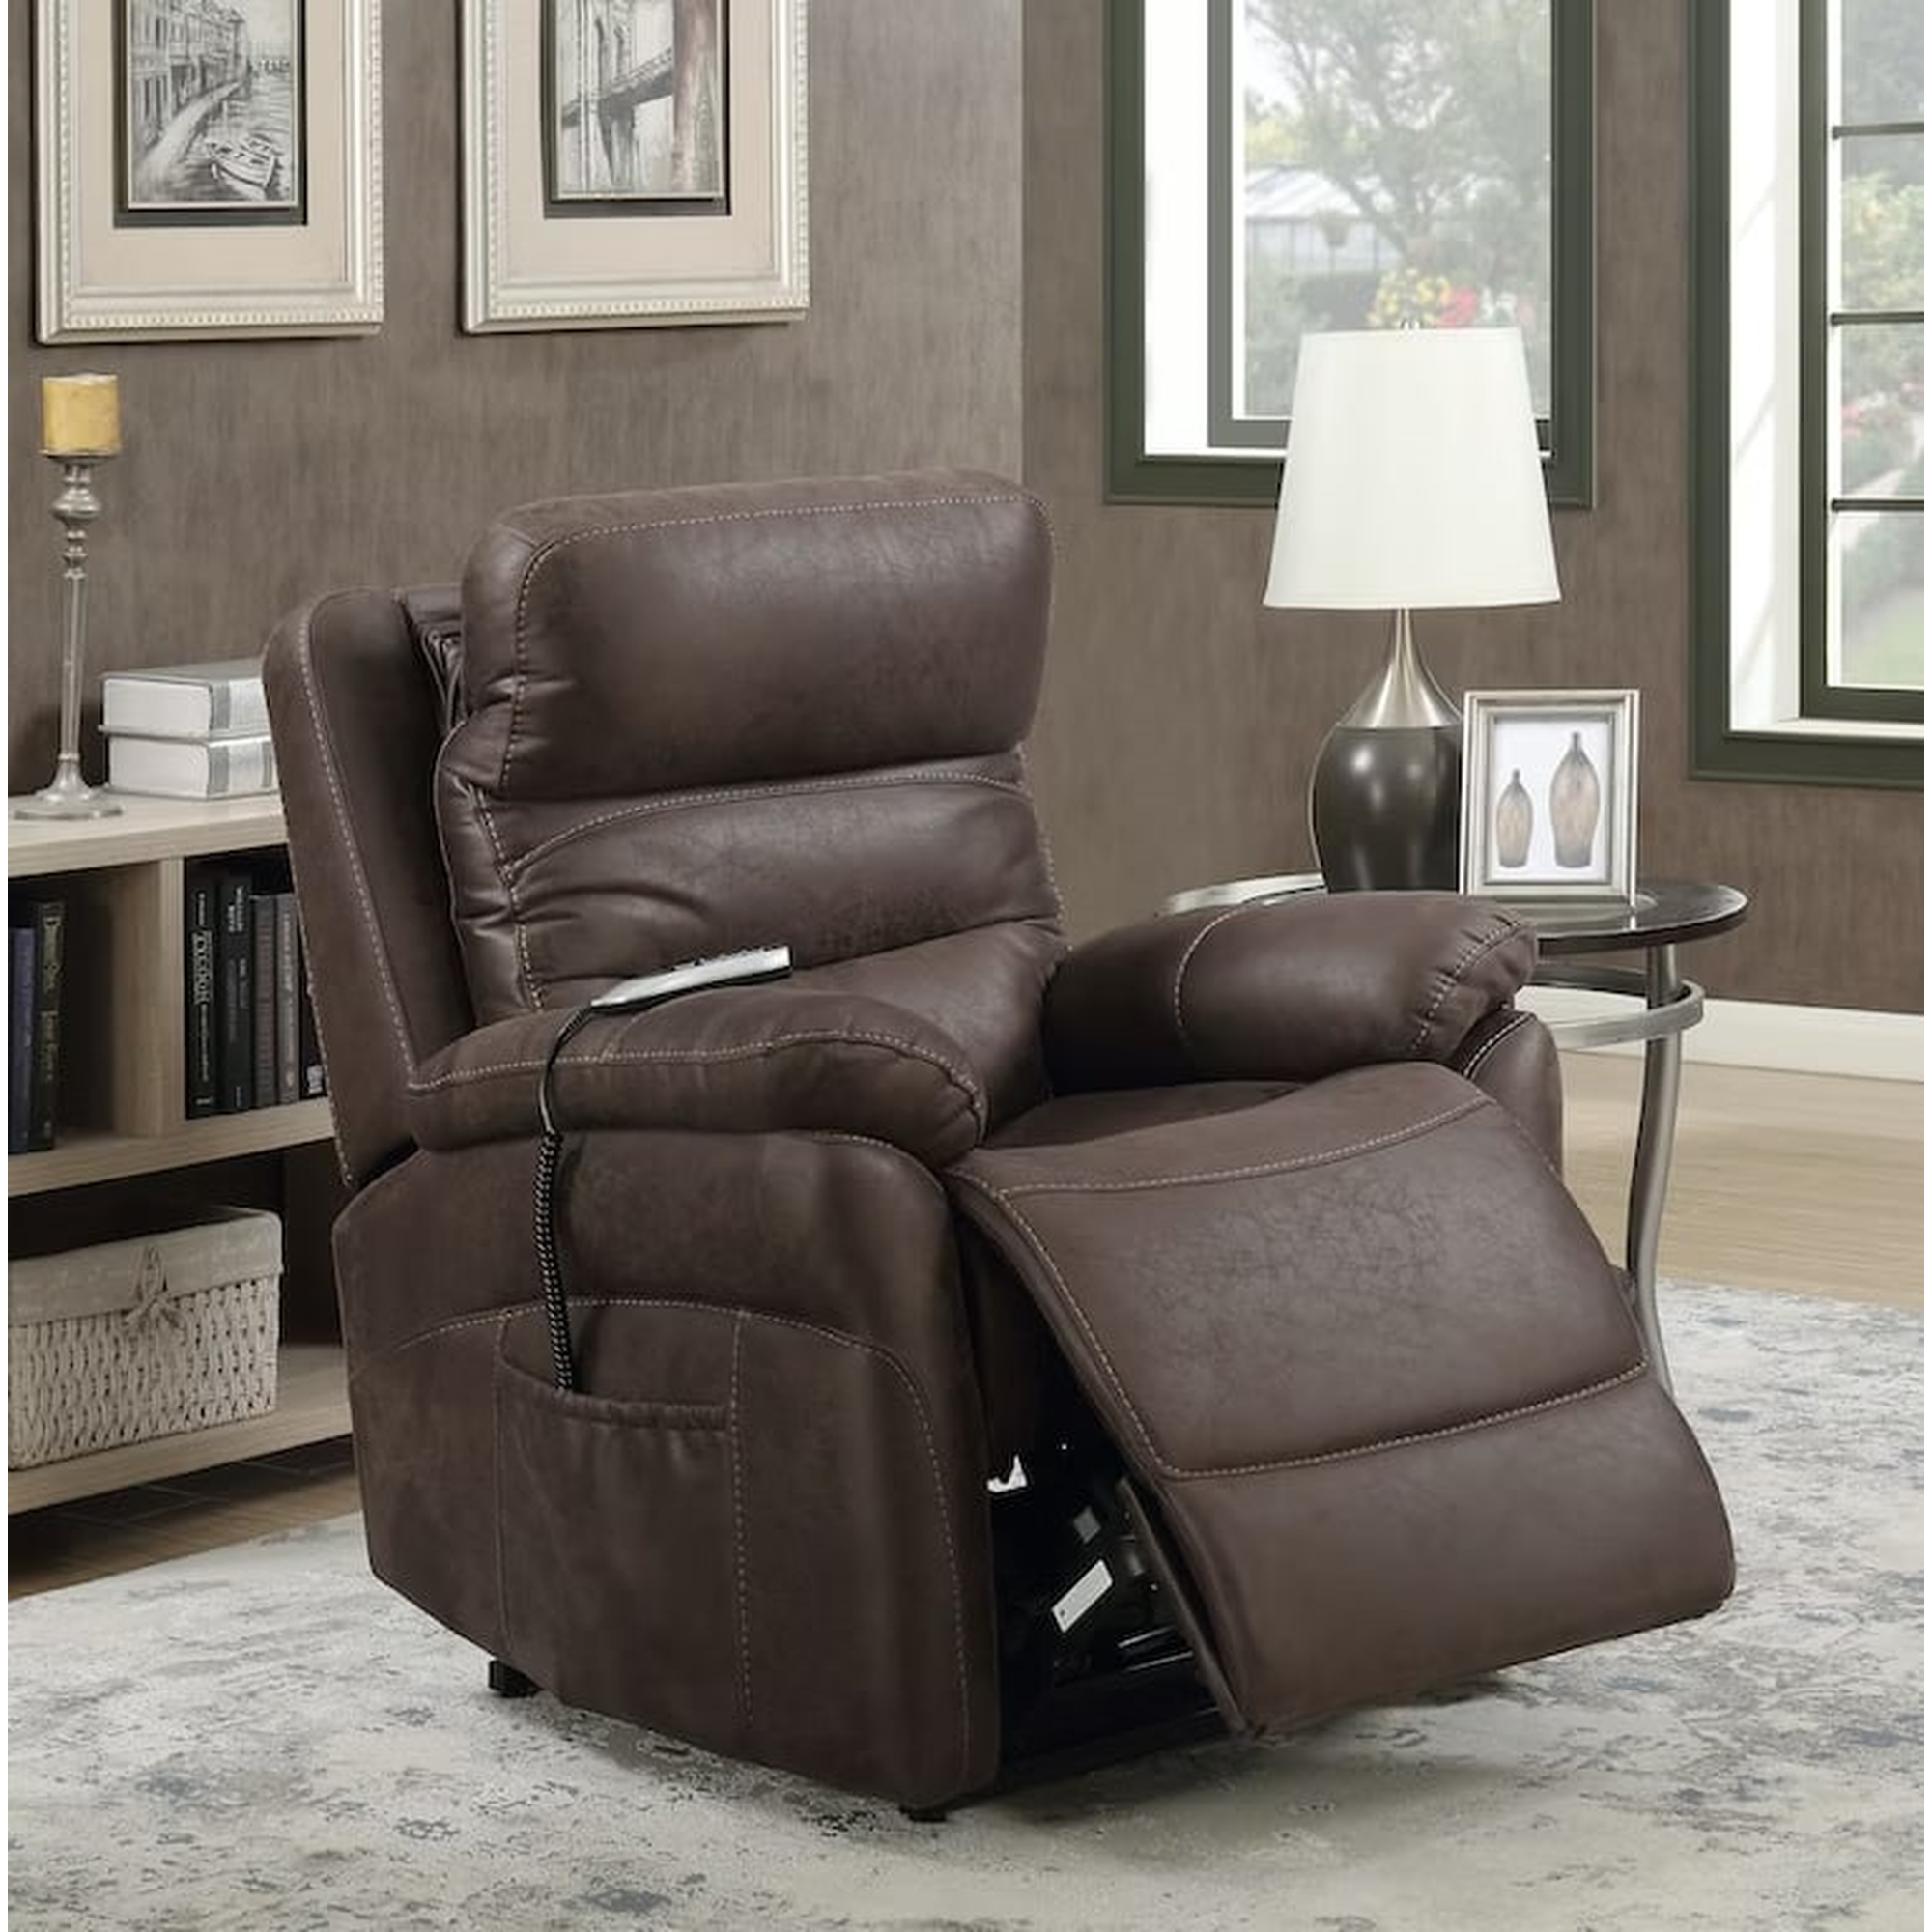 Prime Resources International Dalton A547-015-046 Power Lift Chair in  Whiskey, Royal Furniture